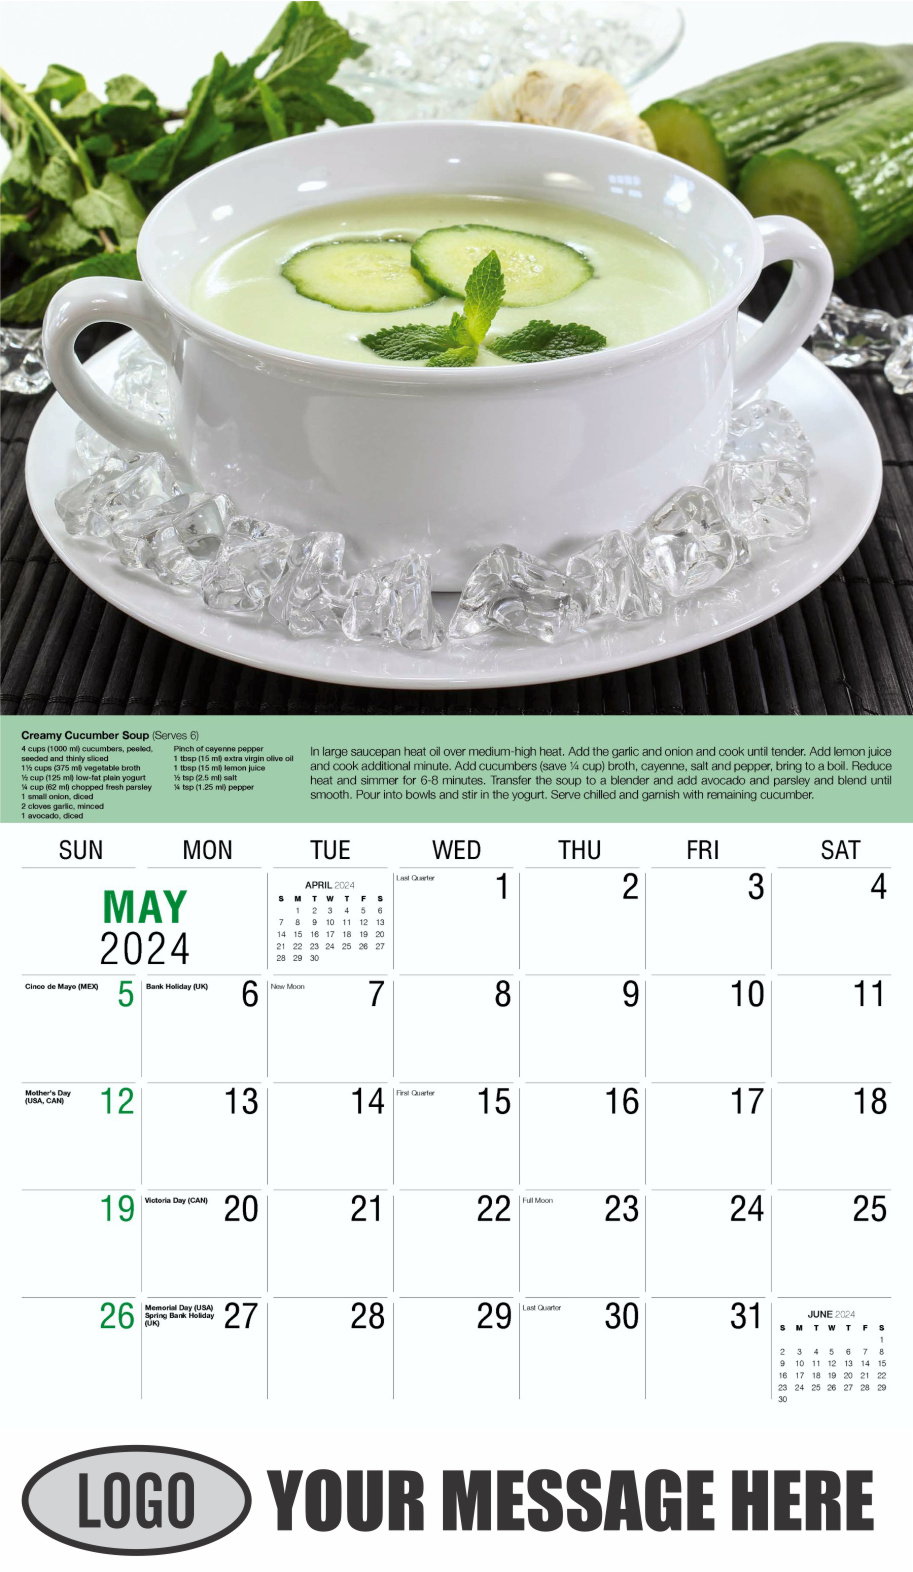 Recipes 2024 Business Promotional Calendar - May